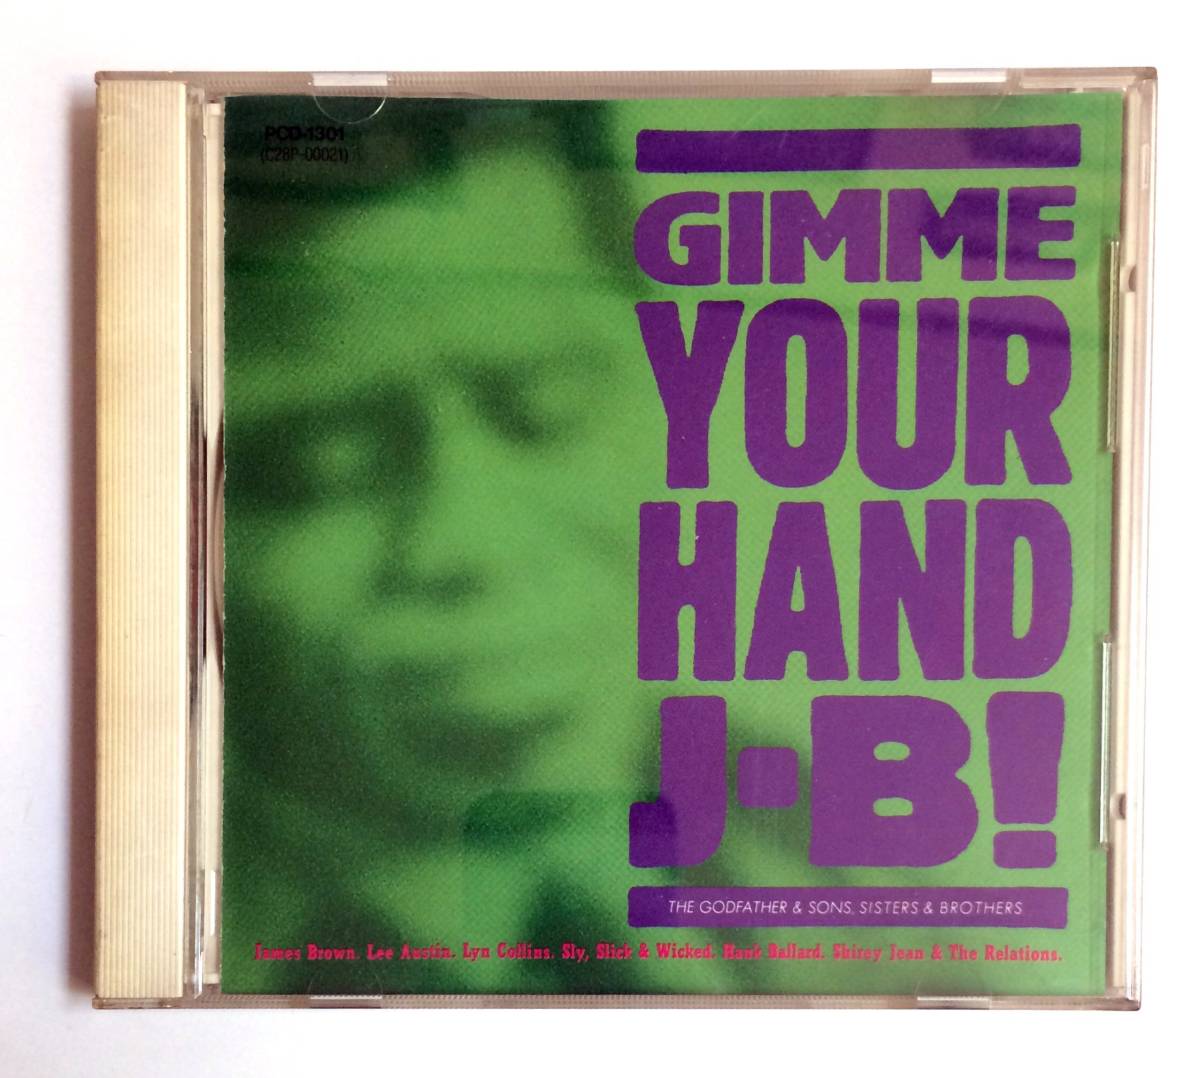 GIMME YOUR HANDS J-B! James Brown